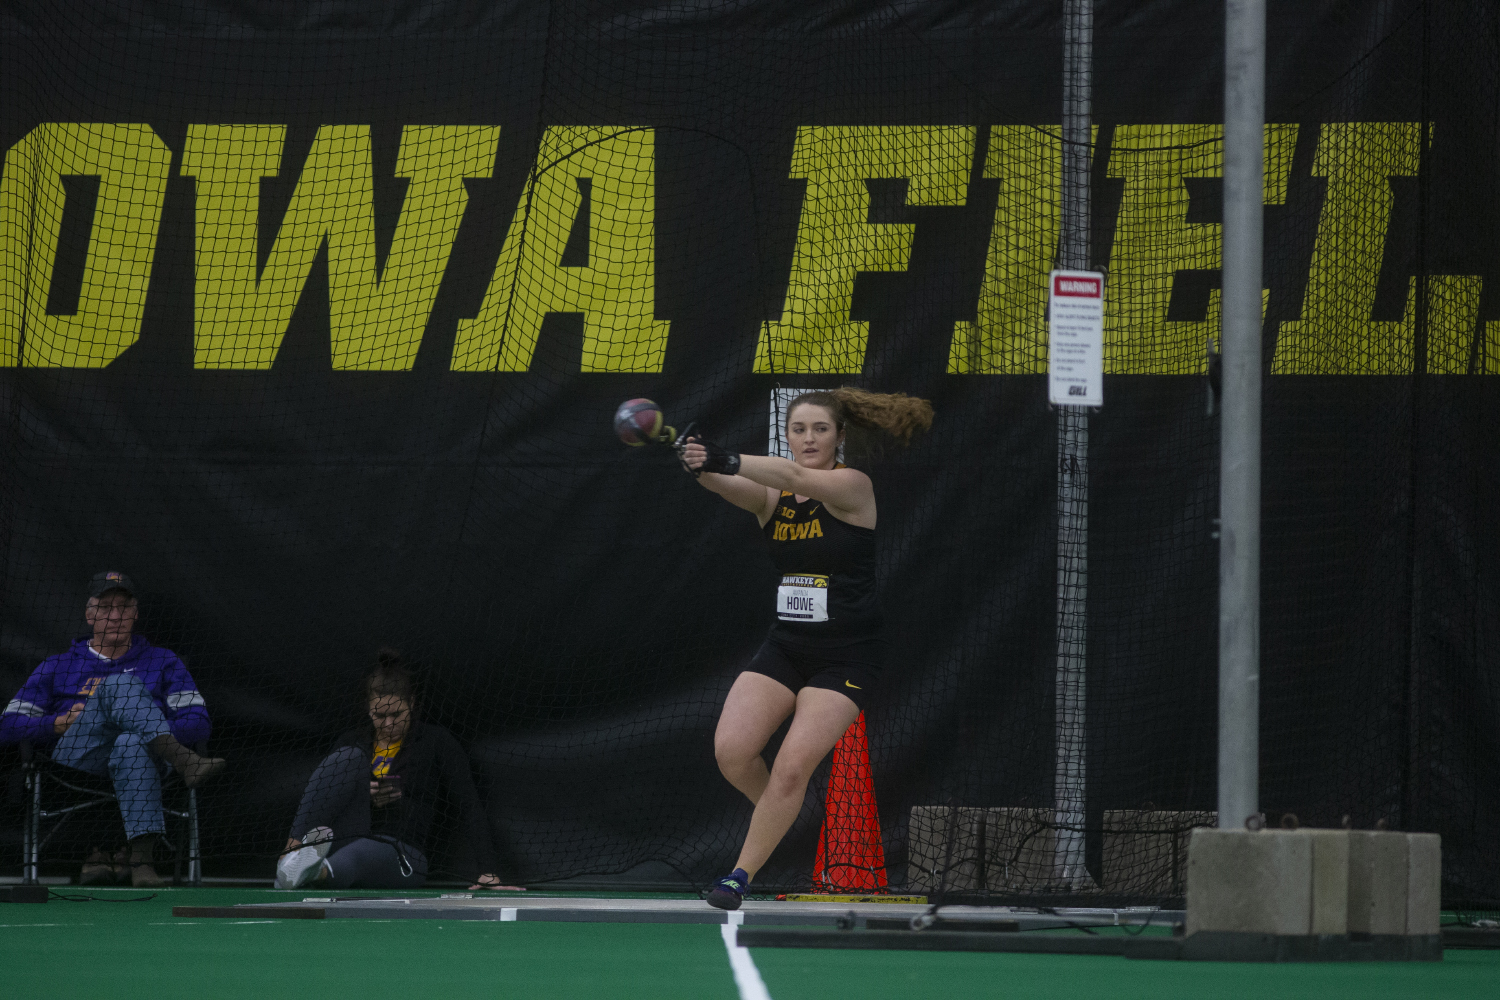 Iowa track and field records seven alltime top 10 performances at